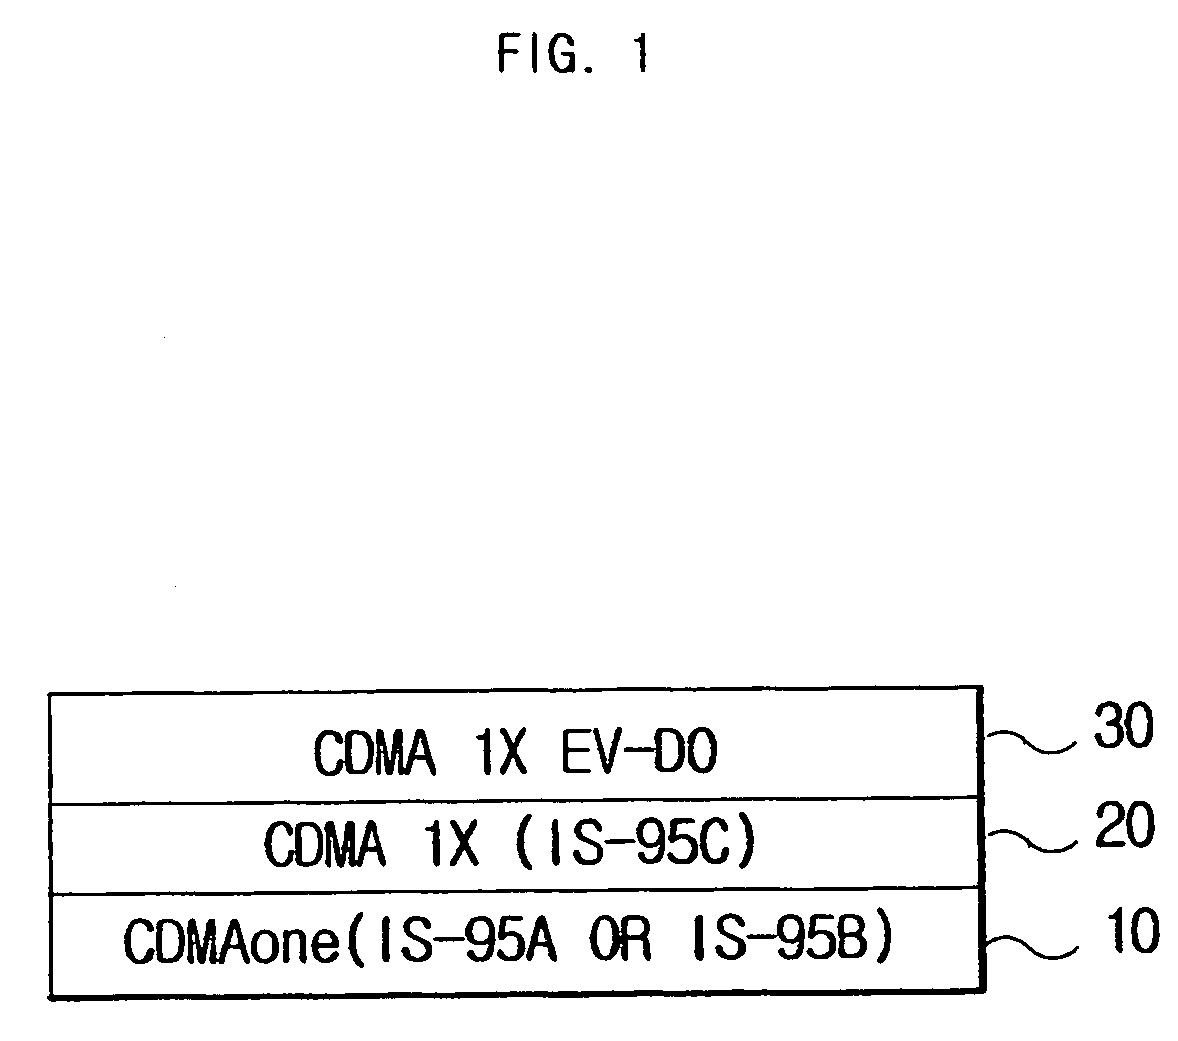 Method for increasing standby time using access history to 1x ev-do network with access terminal and device thereof